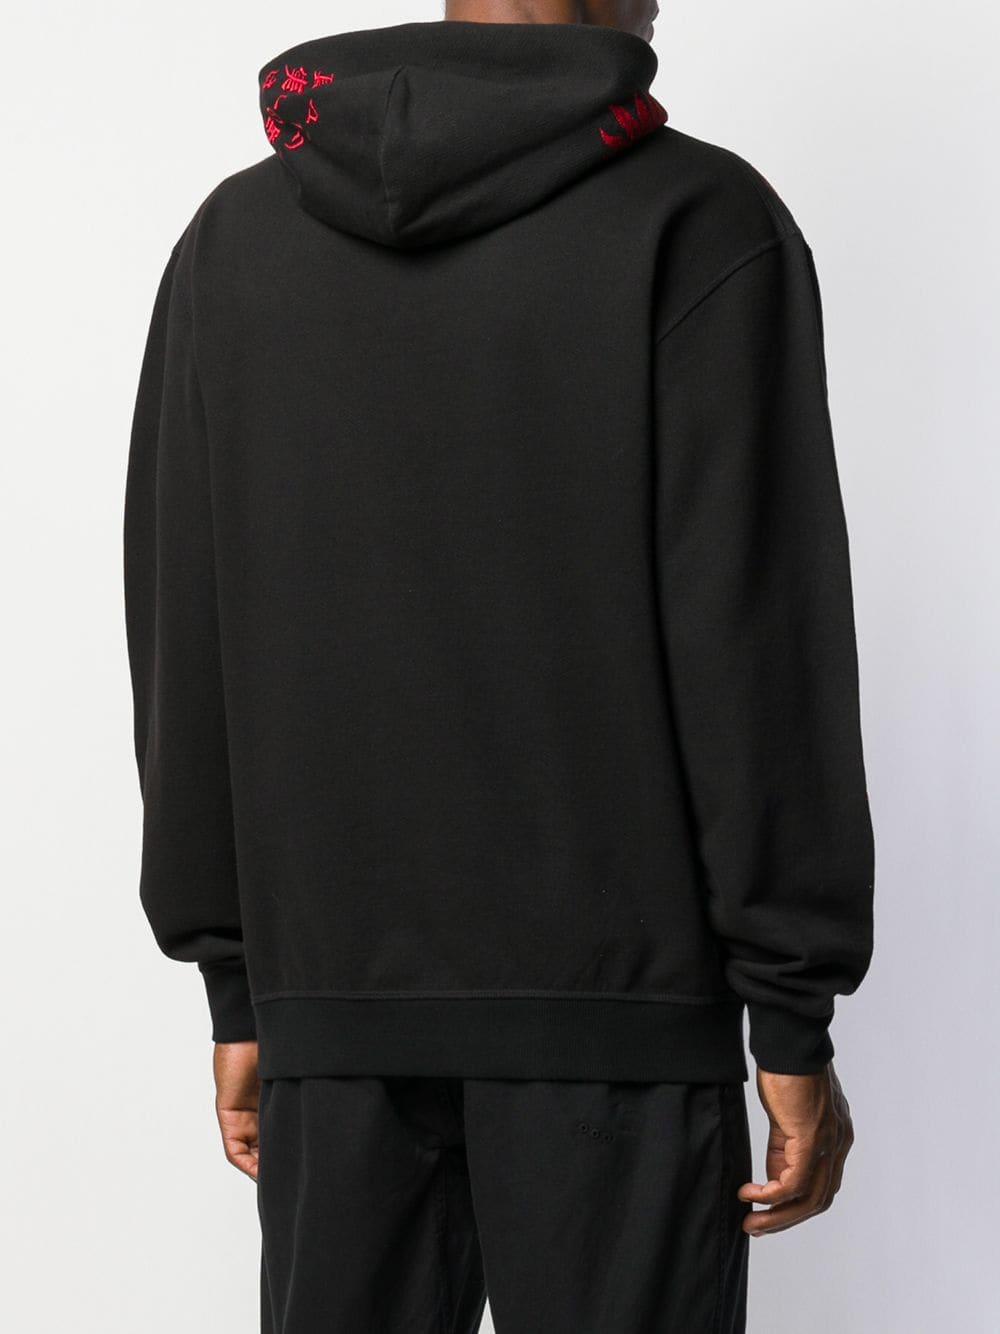 Maharishi Cotton Embroidered Dragon Hoodie in Black for Men - Lyst